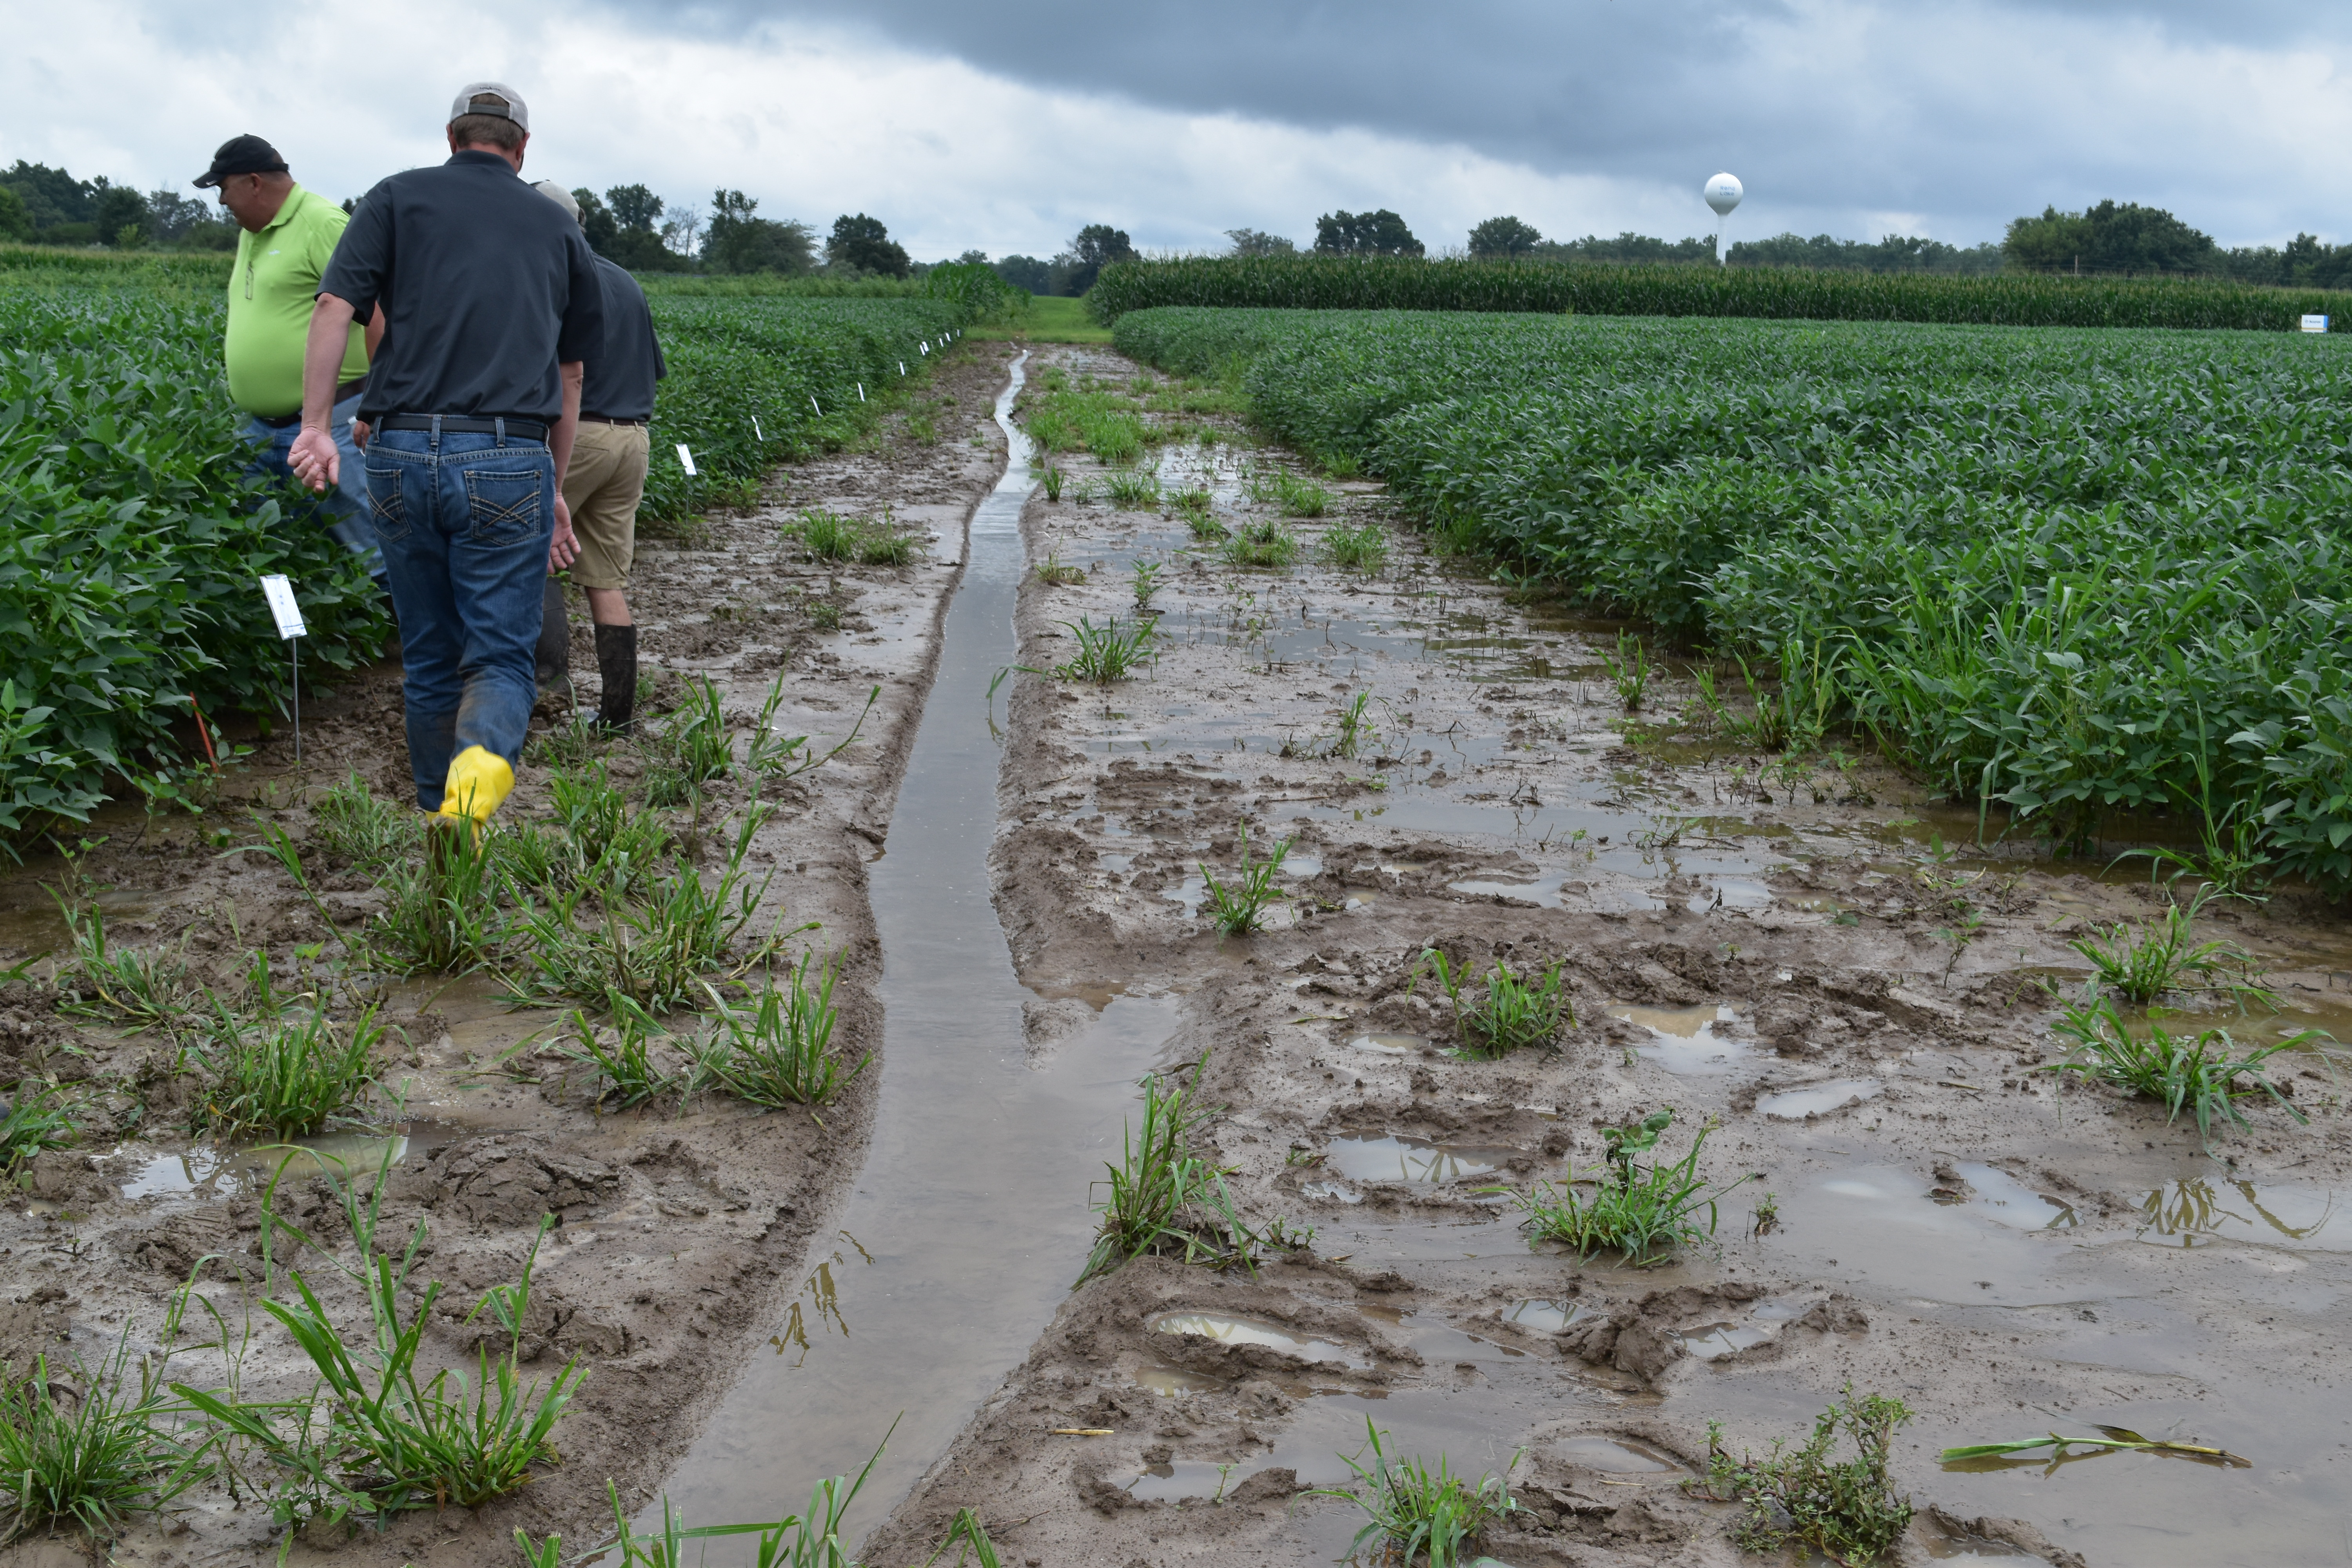 This agronomic photo shows growers assessing wet conditions in Southern Illinois soybean fields.